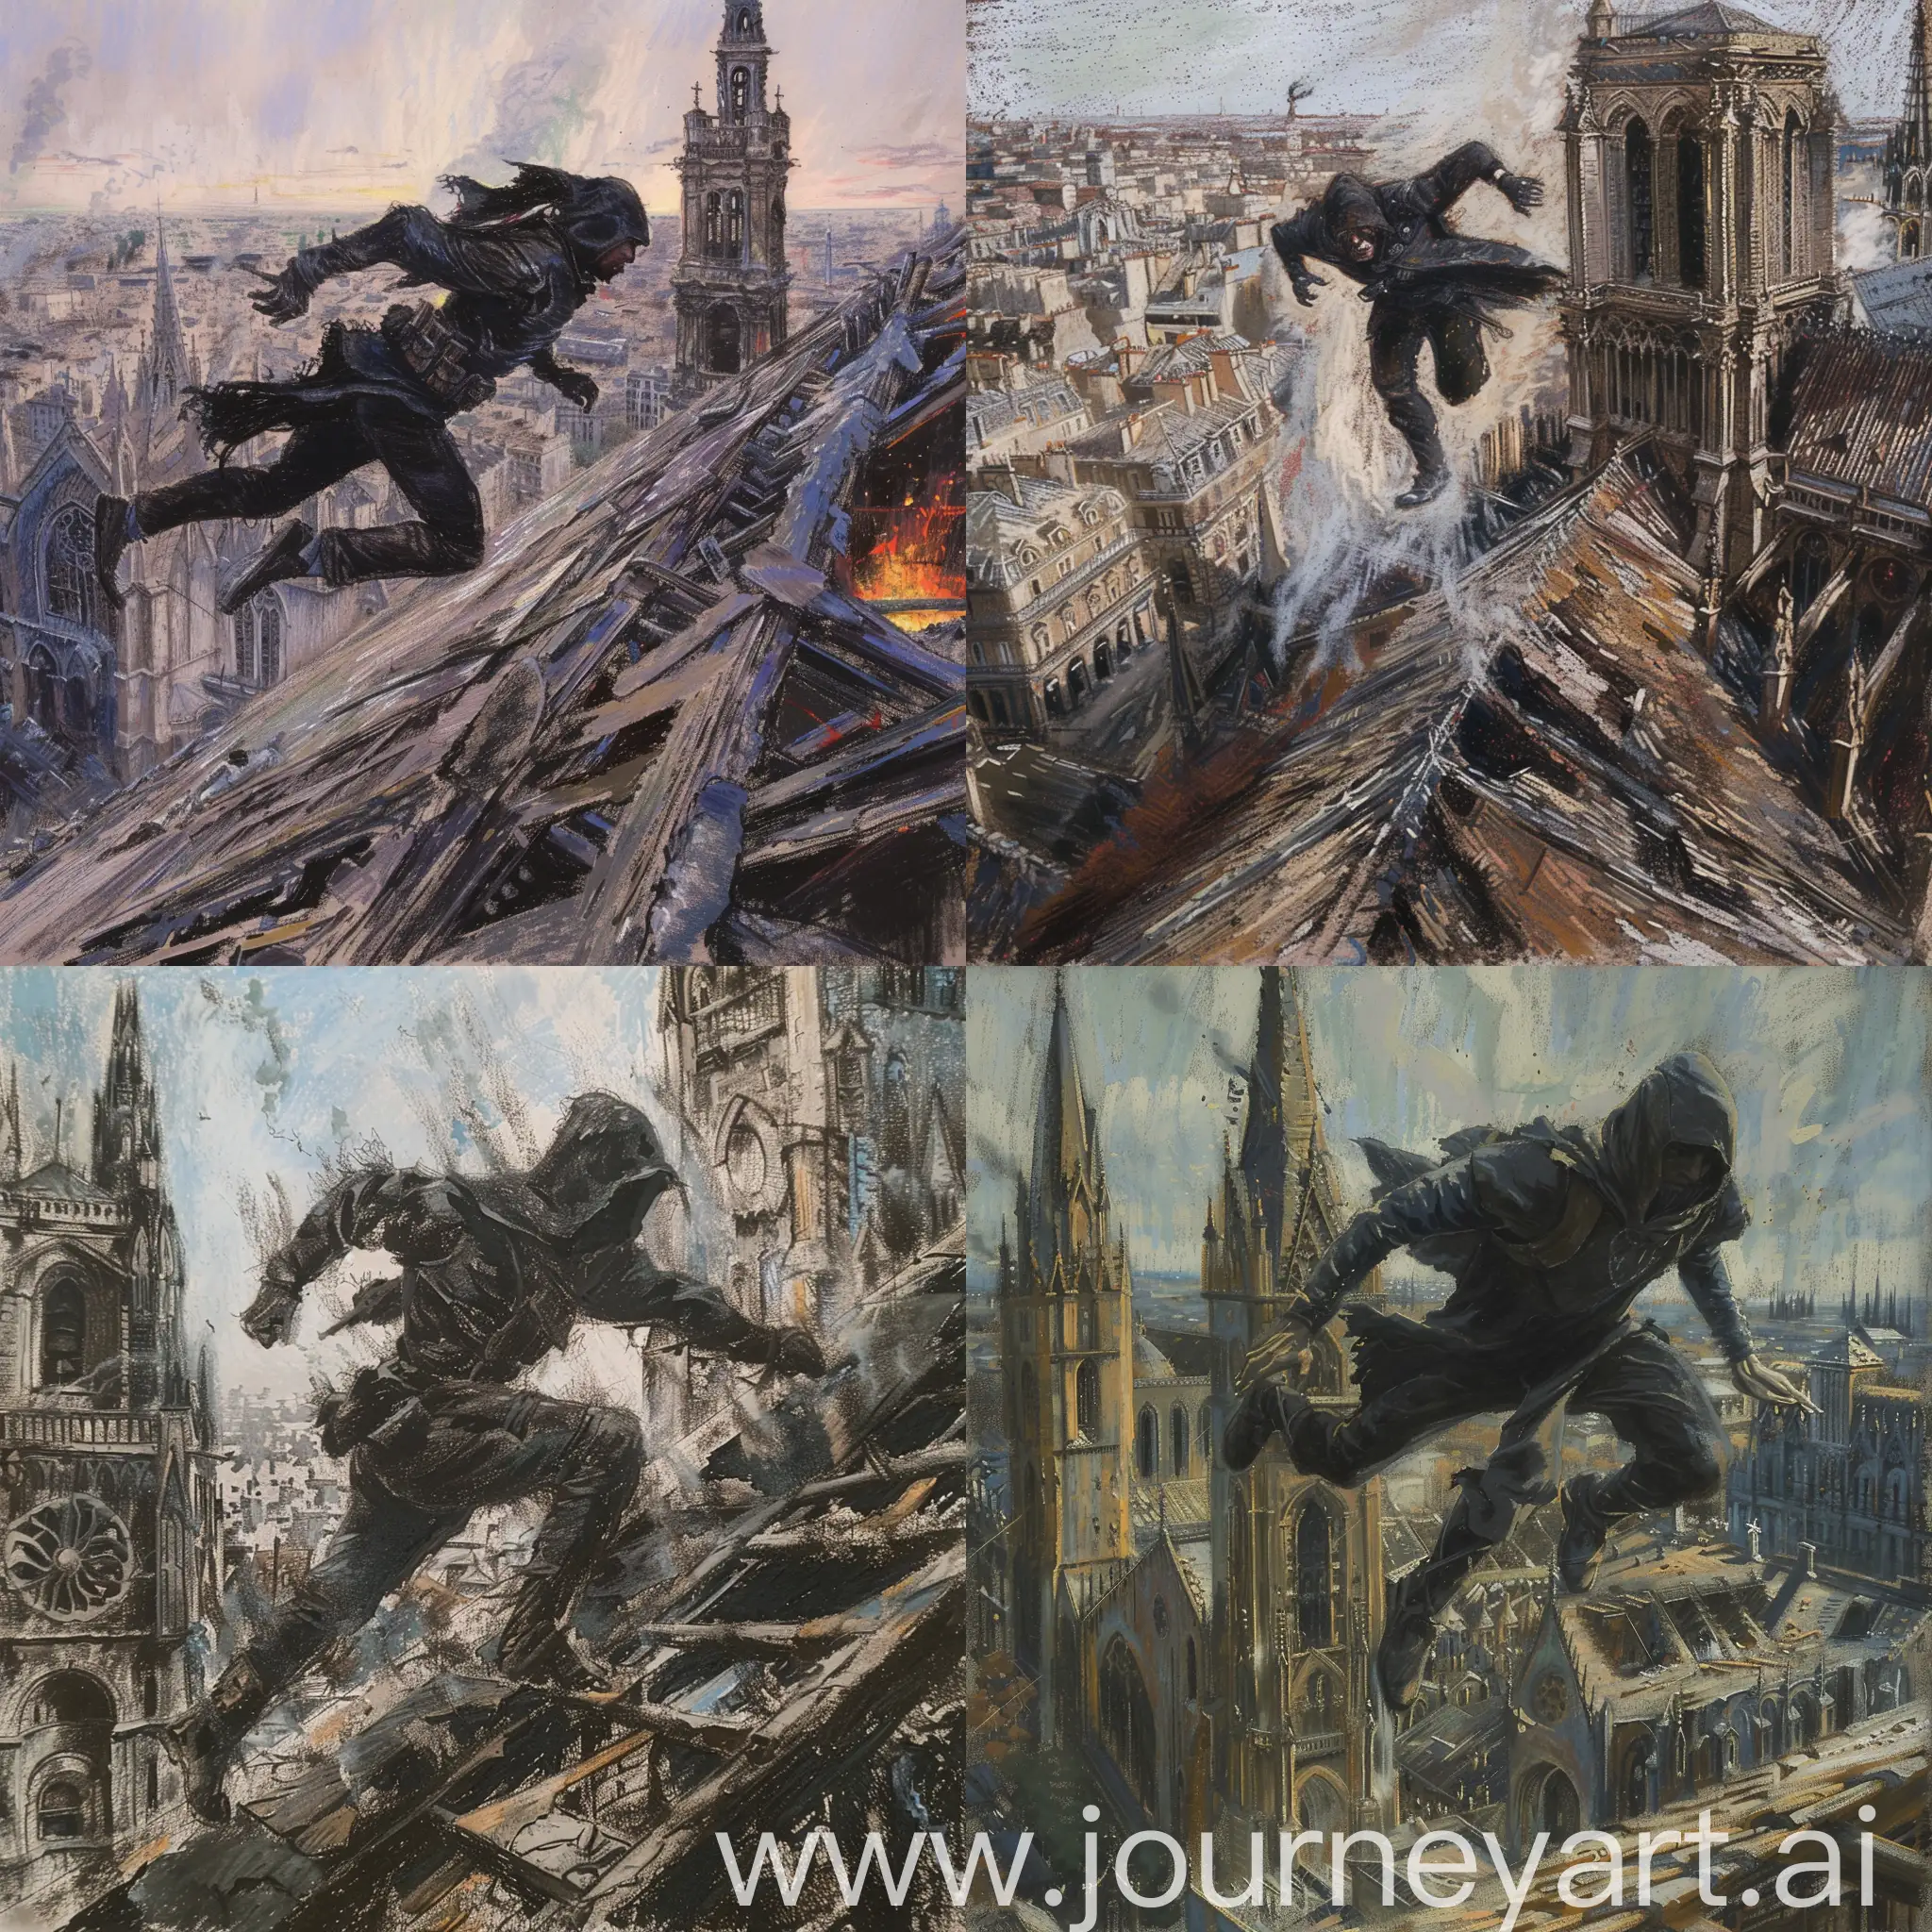 pastel painting of eversor assassin sprinting on the roof of ruined cathedral in a city where the war is raging